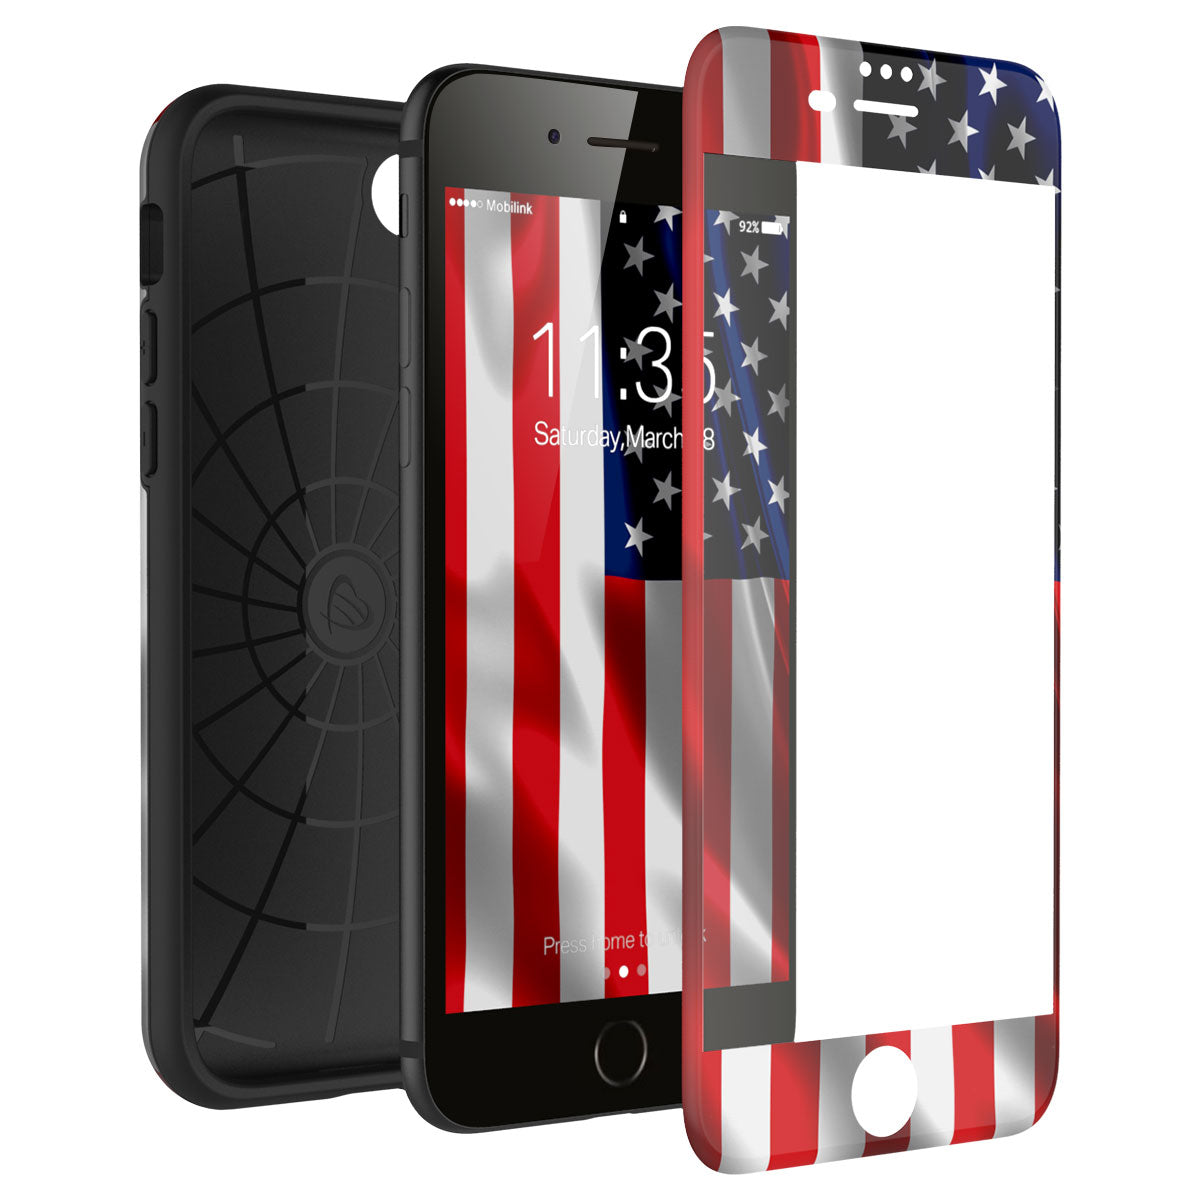 LUVVITT ARTOLOGY Case and Tempered Glass Set for iPhone 7/8 - American Flag